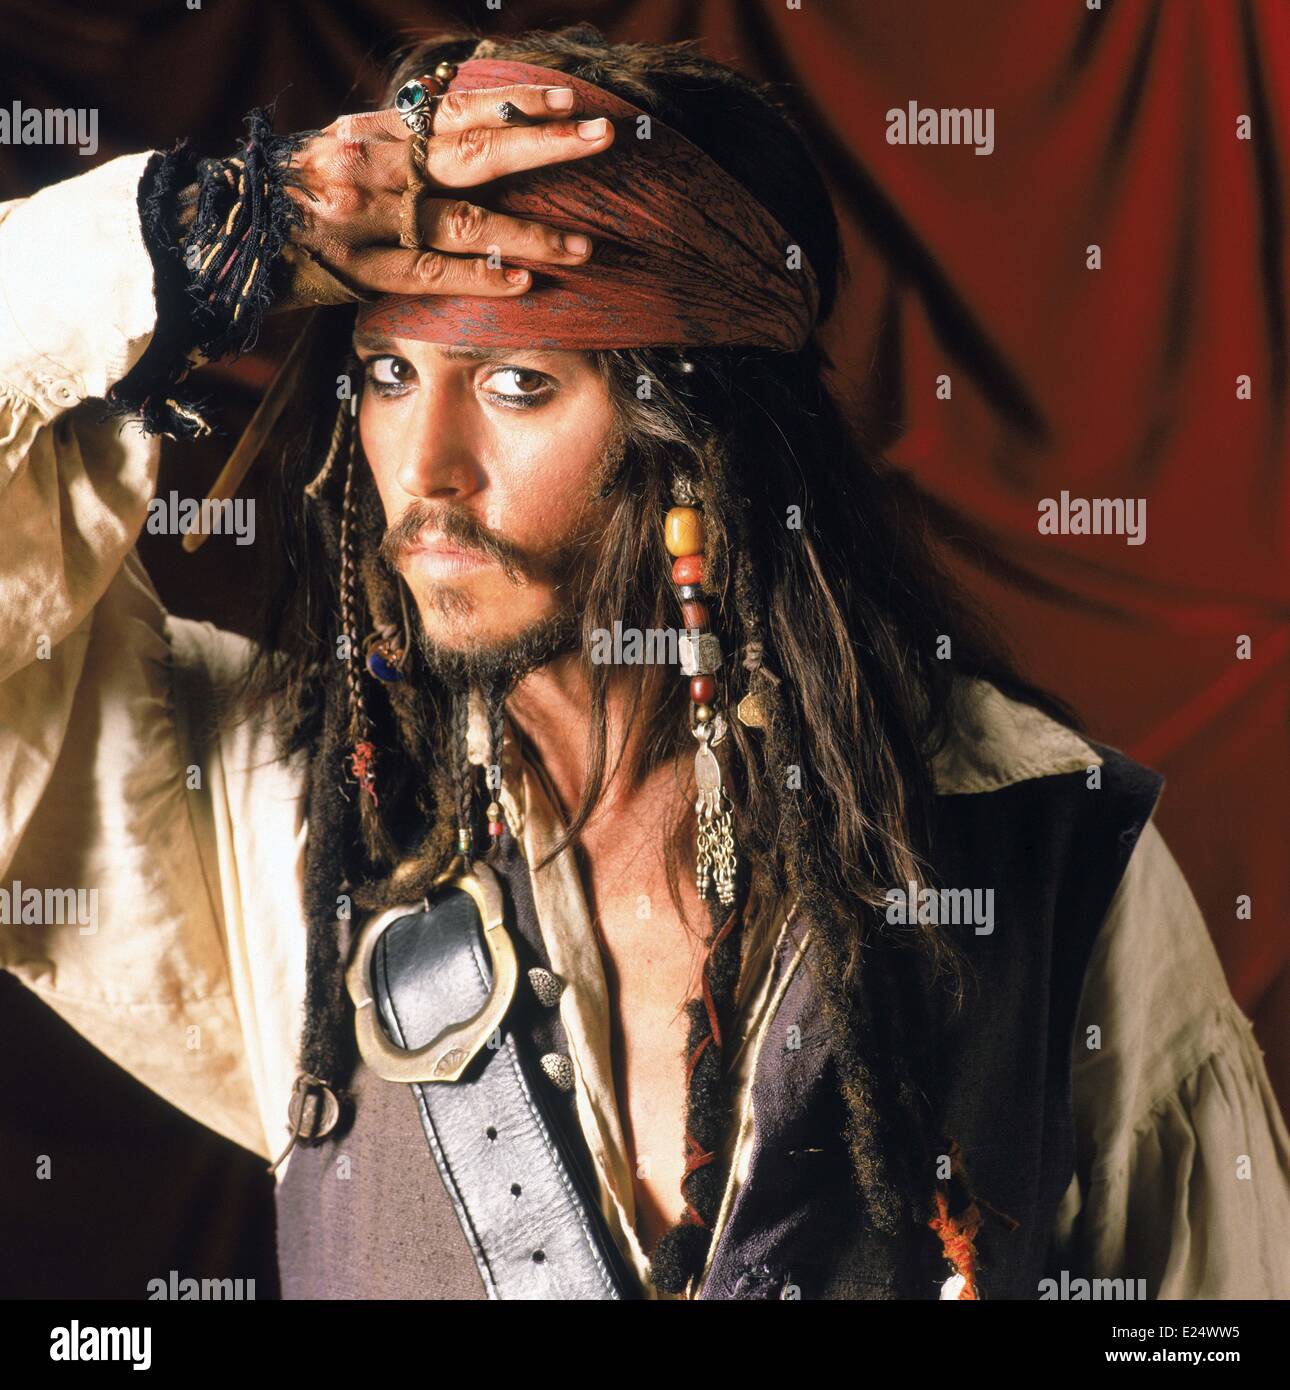 Johnny Depp as Captain Jack Sparrow in ''Pirates Of The Caribbean: Curse Of The Black Pearl'' (2003). Directed by Gore Verbinski.  Featuring: Johnny Depp Where: Etats-Unis When: 30 Jan 2013 Stock Photo